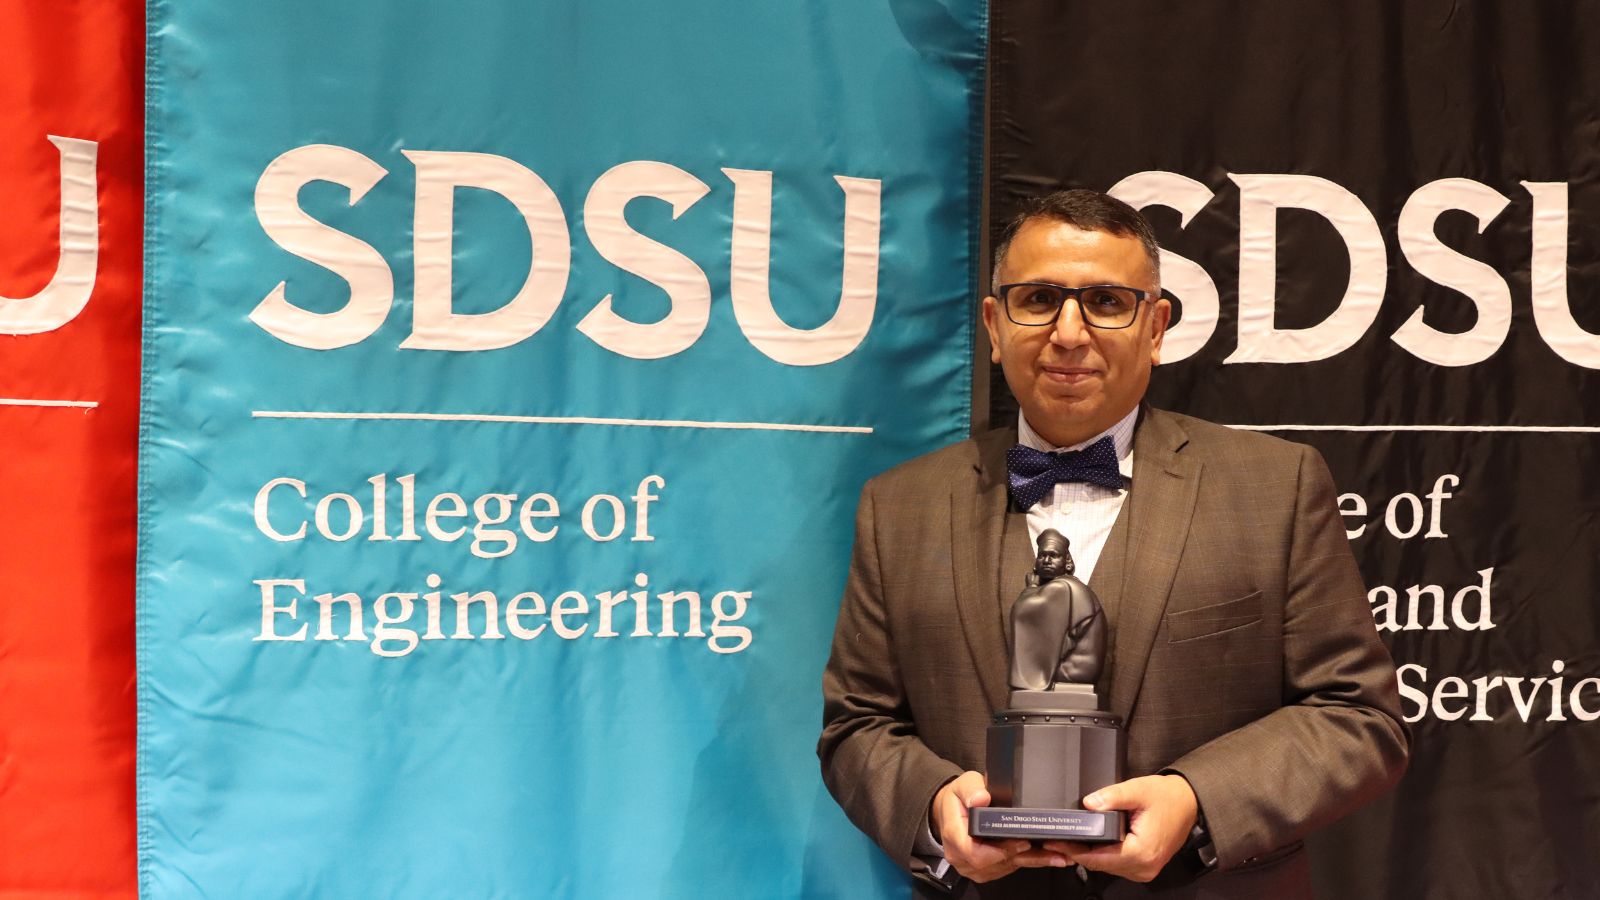 Dr. George Youssef posing with his award